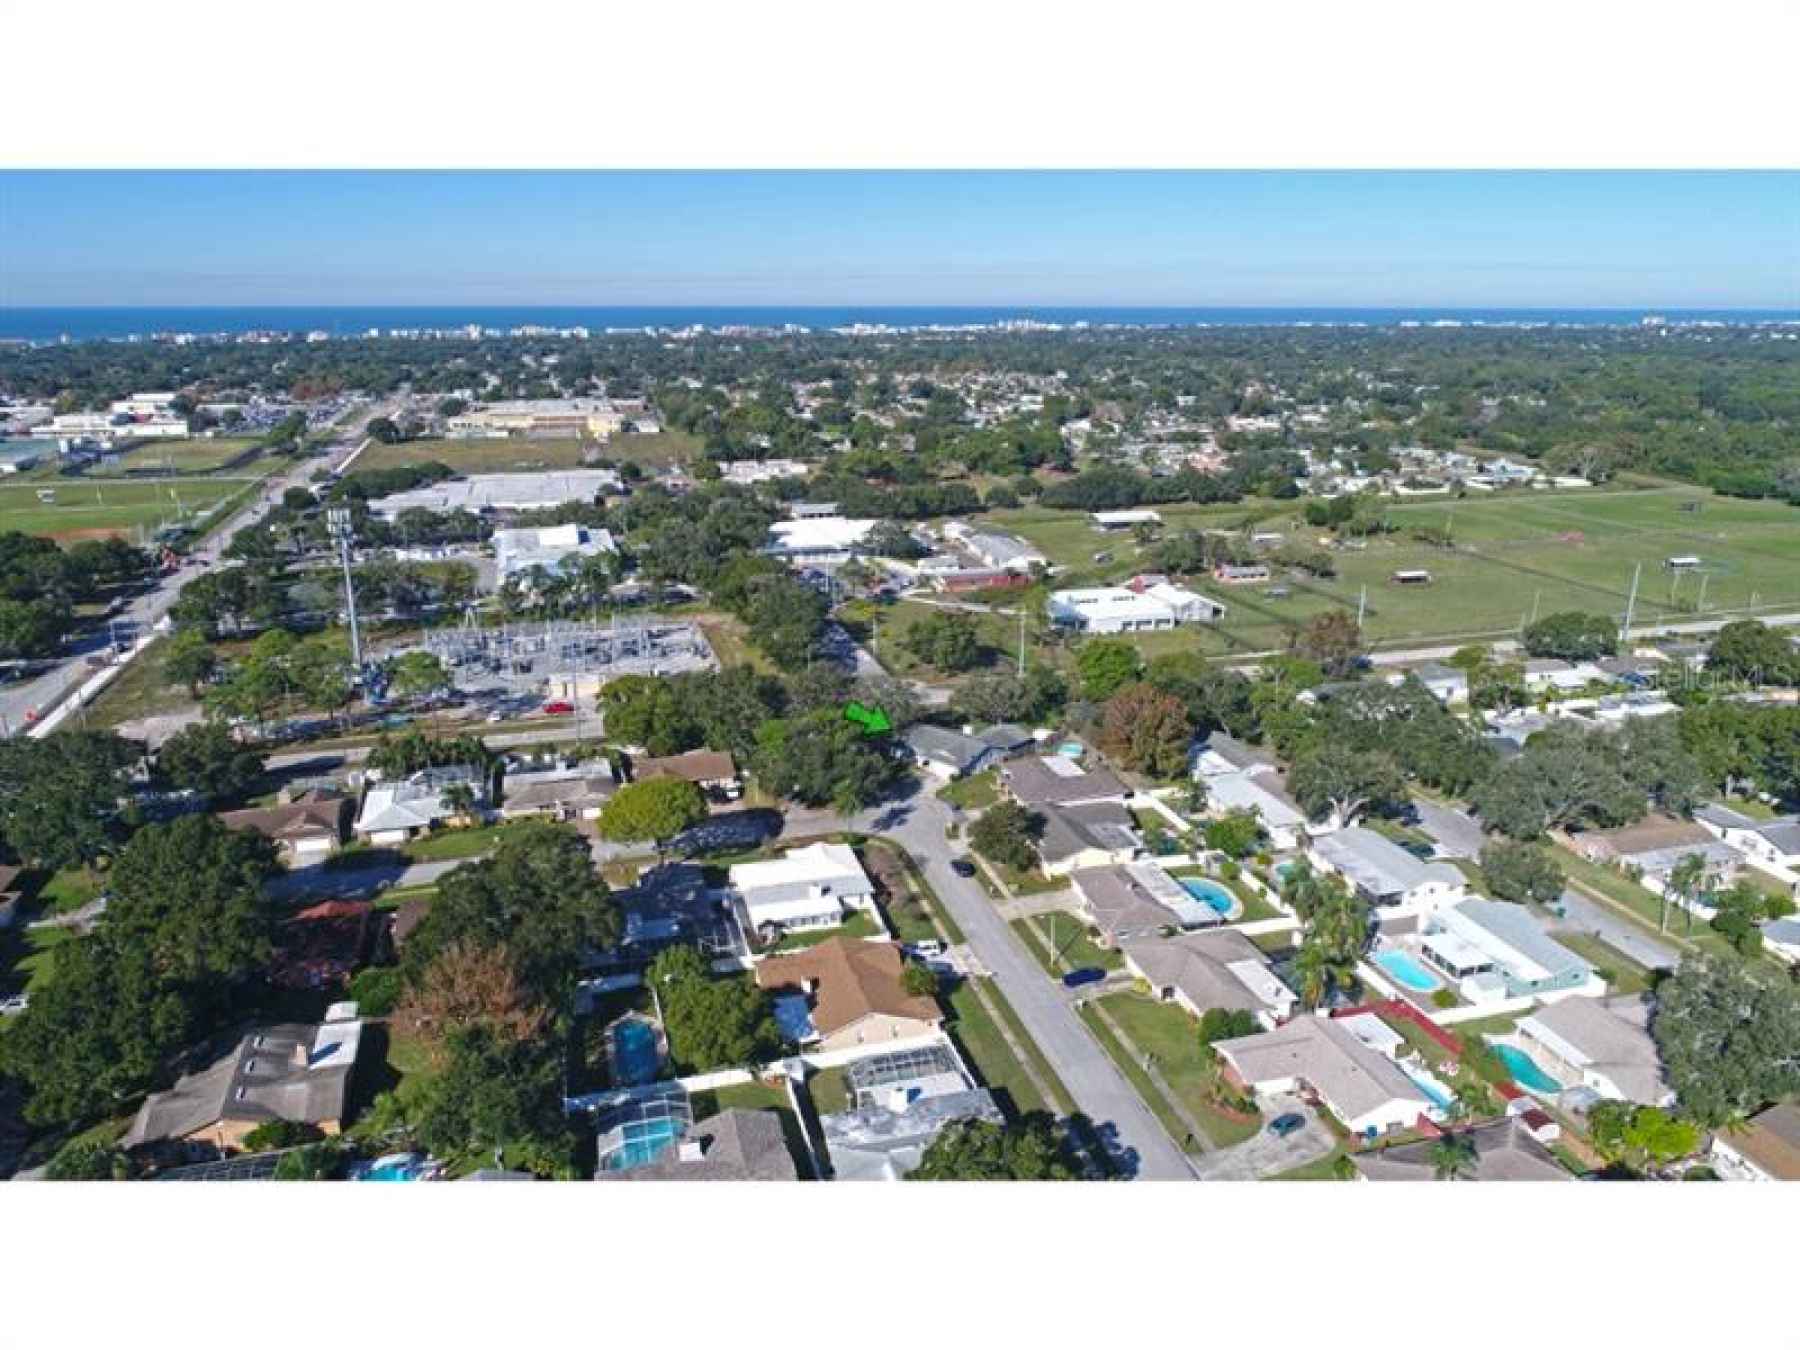 Another look at the neighborhood. Seminole schools a couple of blocks down, shown in the upper left 